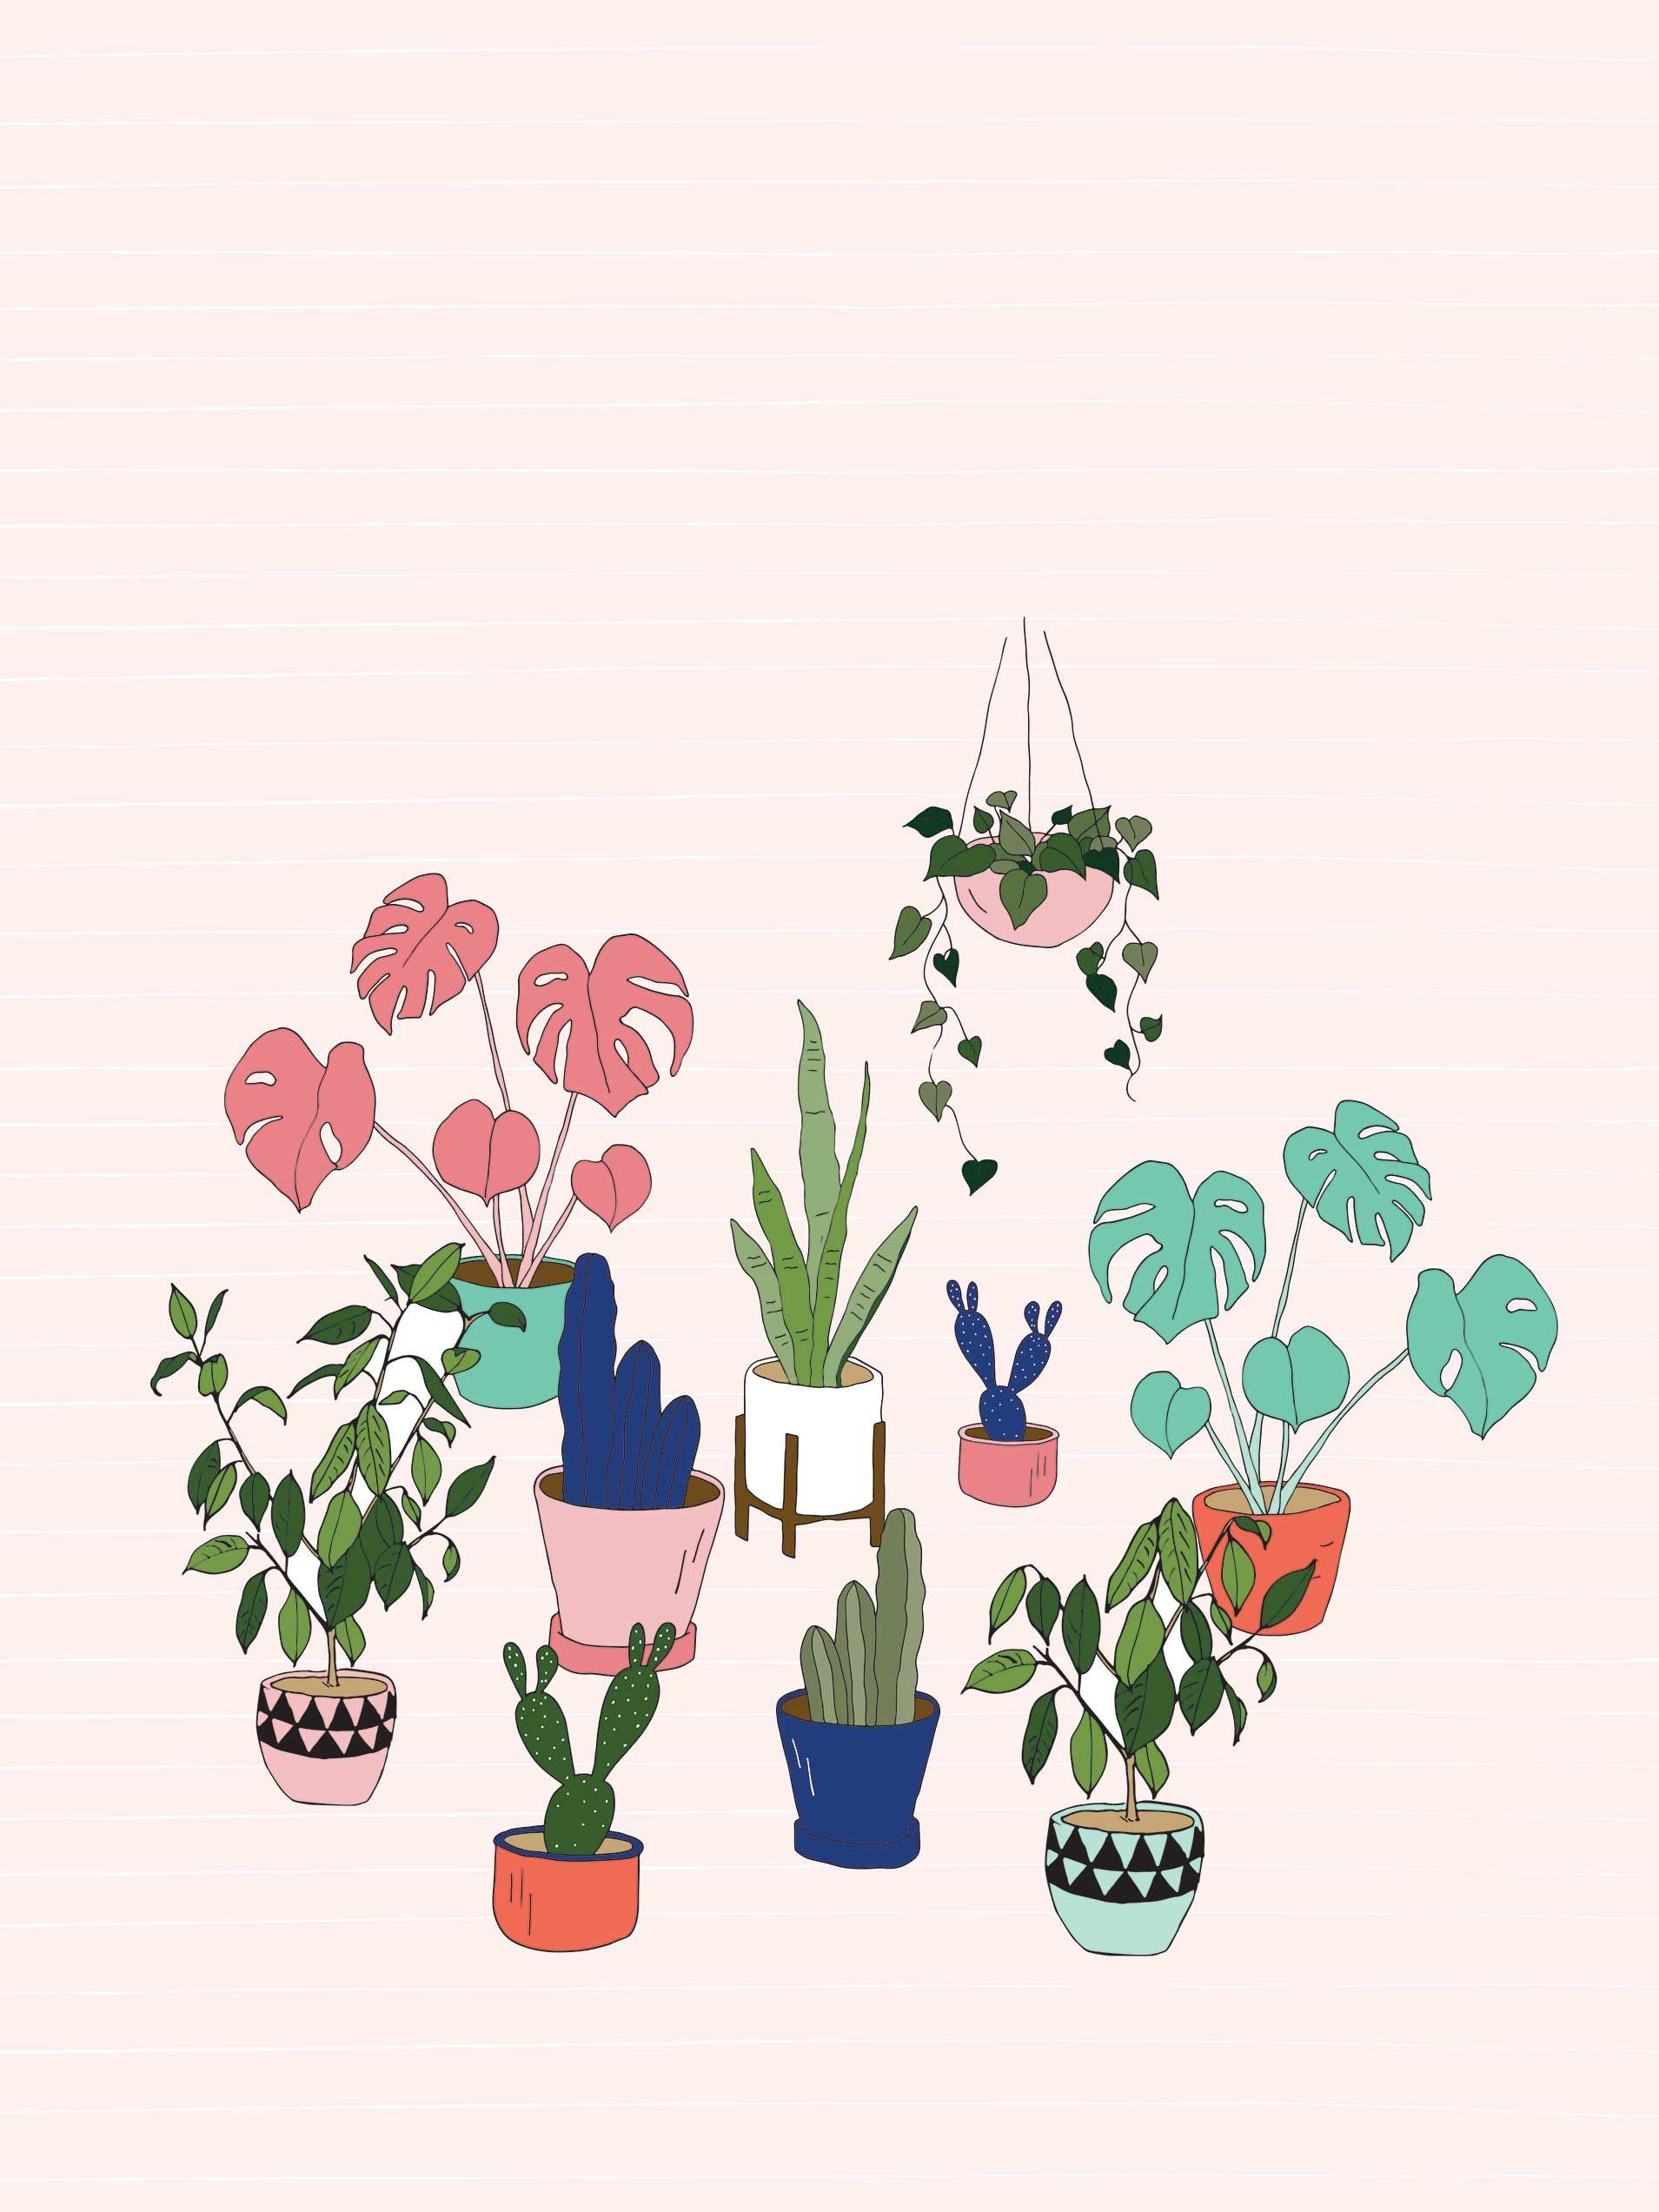 Potted Plants Wallpaper Free .wallpaperaccess.com